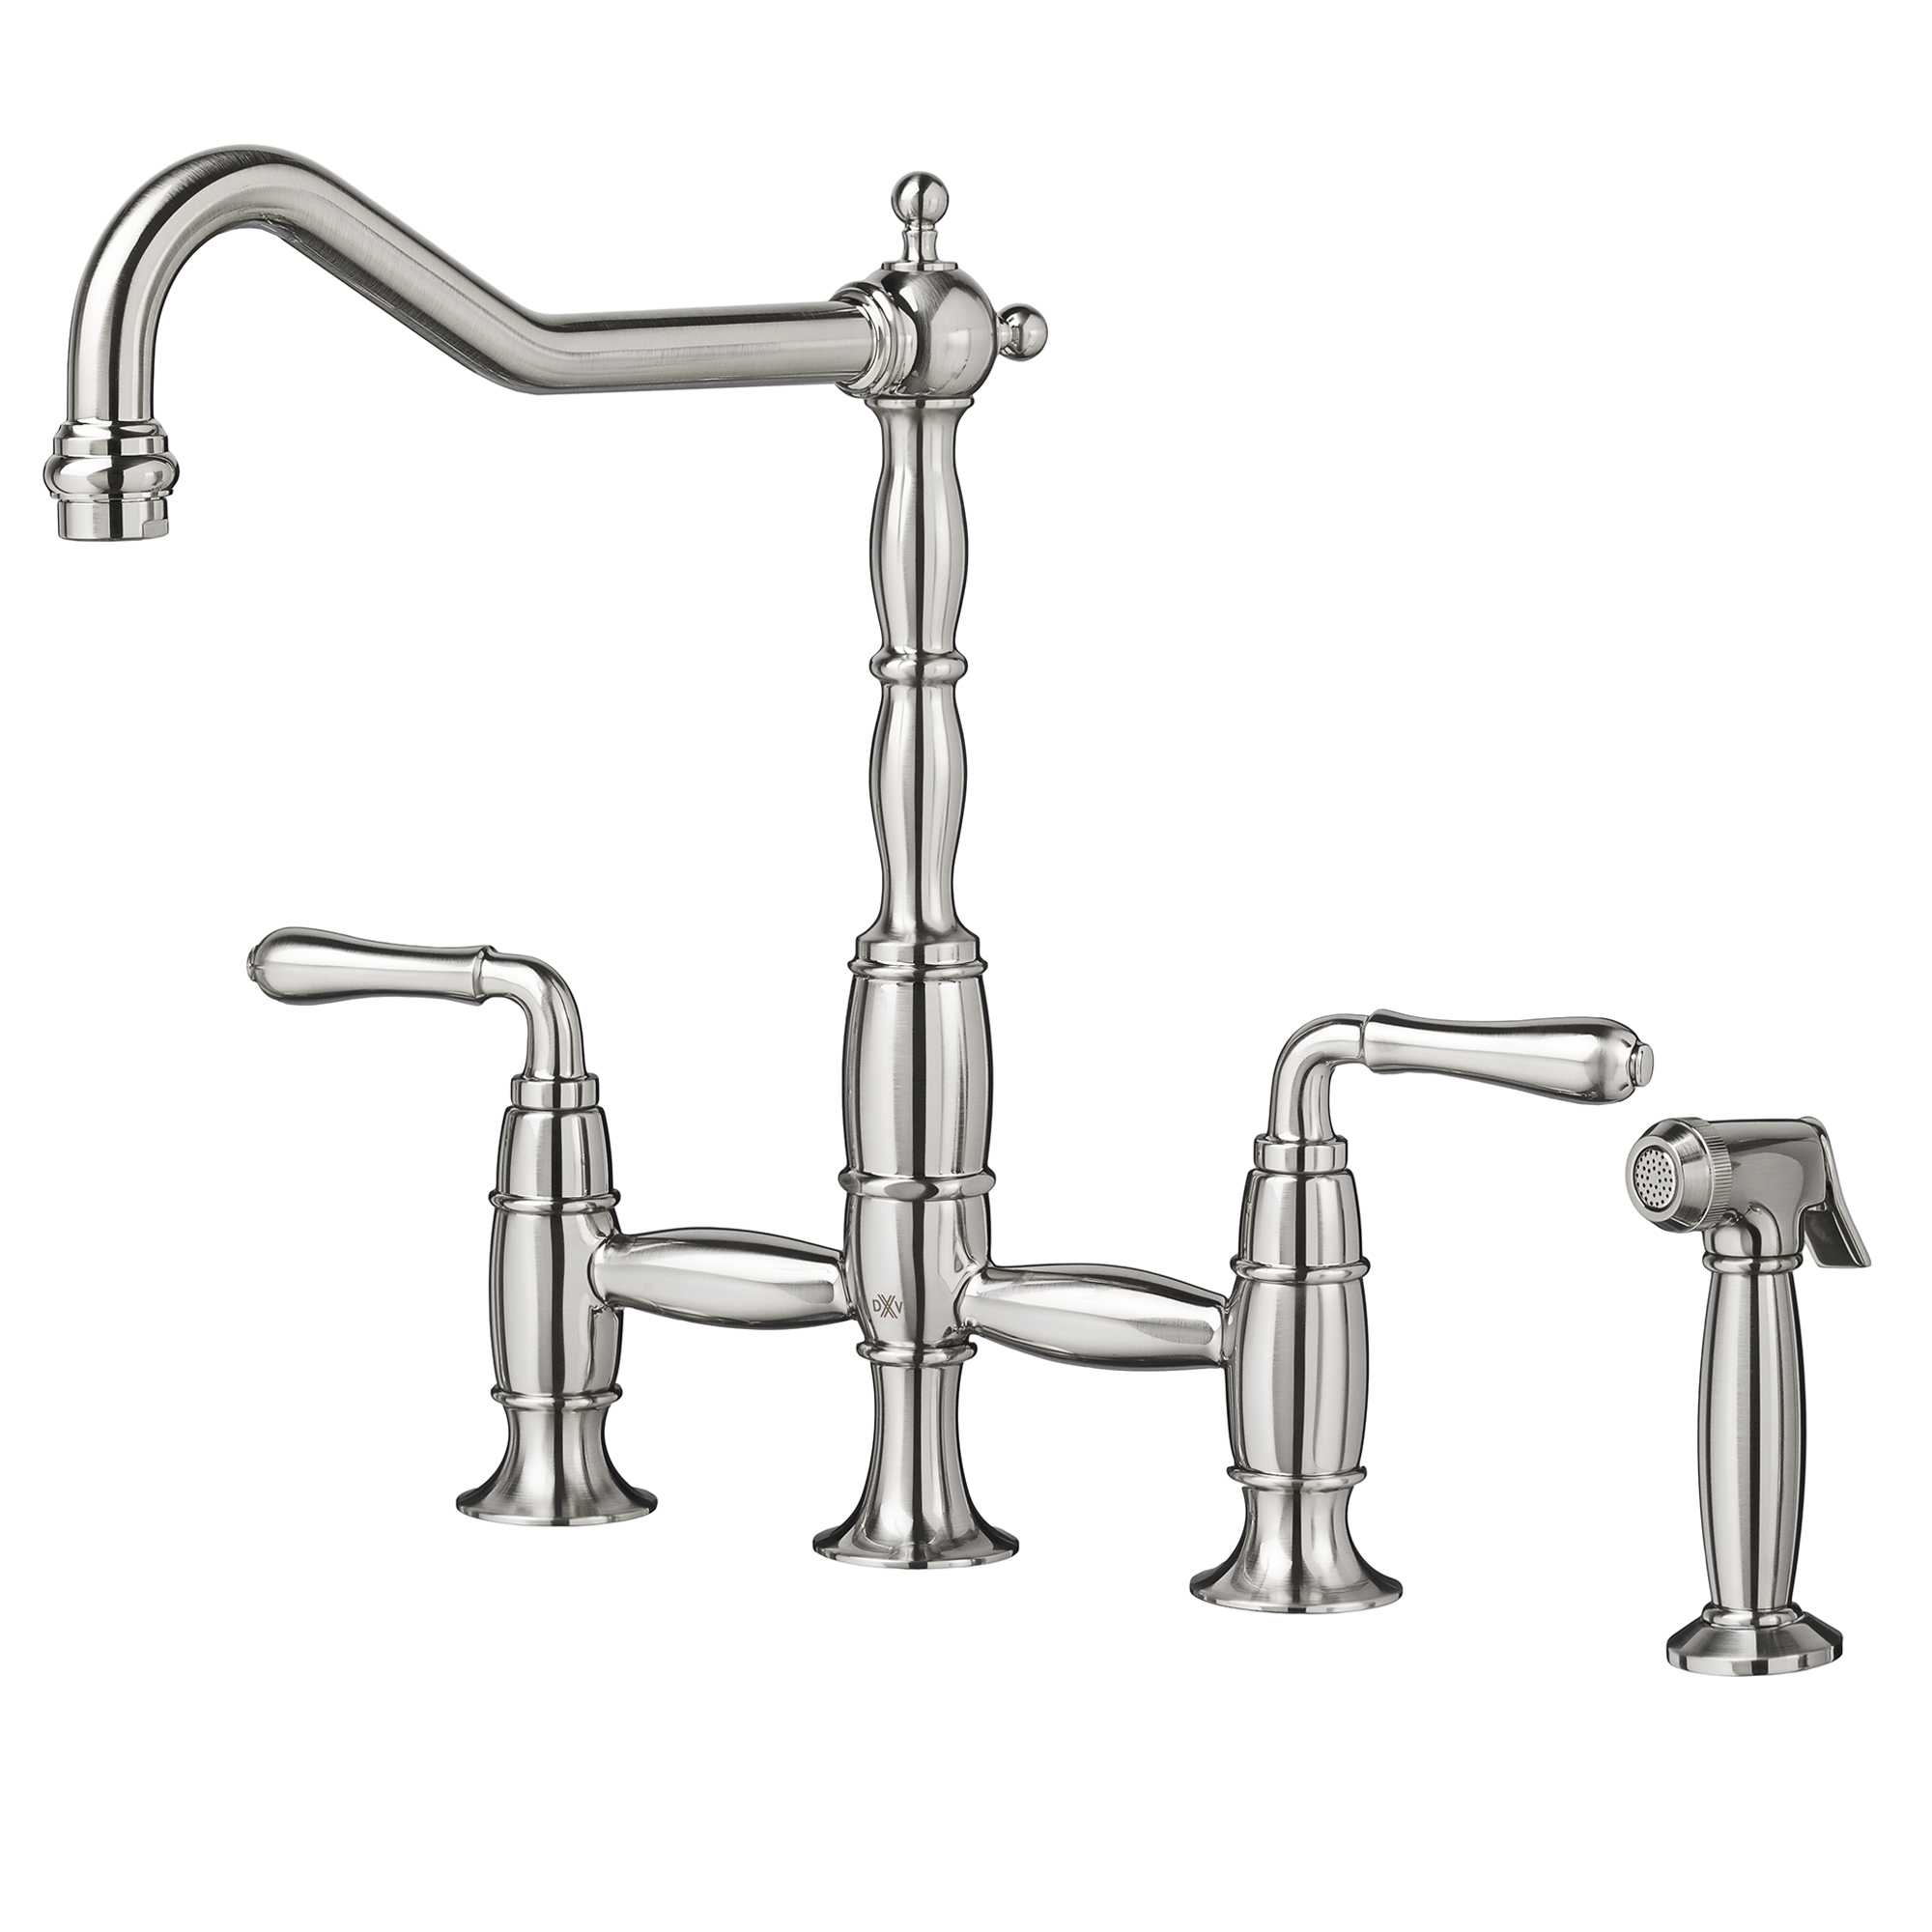 Victorian 2-Handle Widespread Bridge Kitchen Faucet with Side Spray and Lever Handles